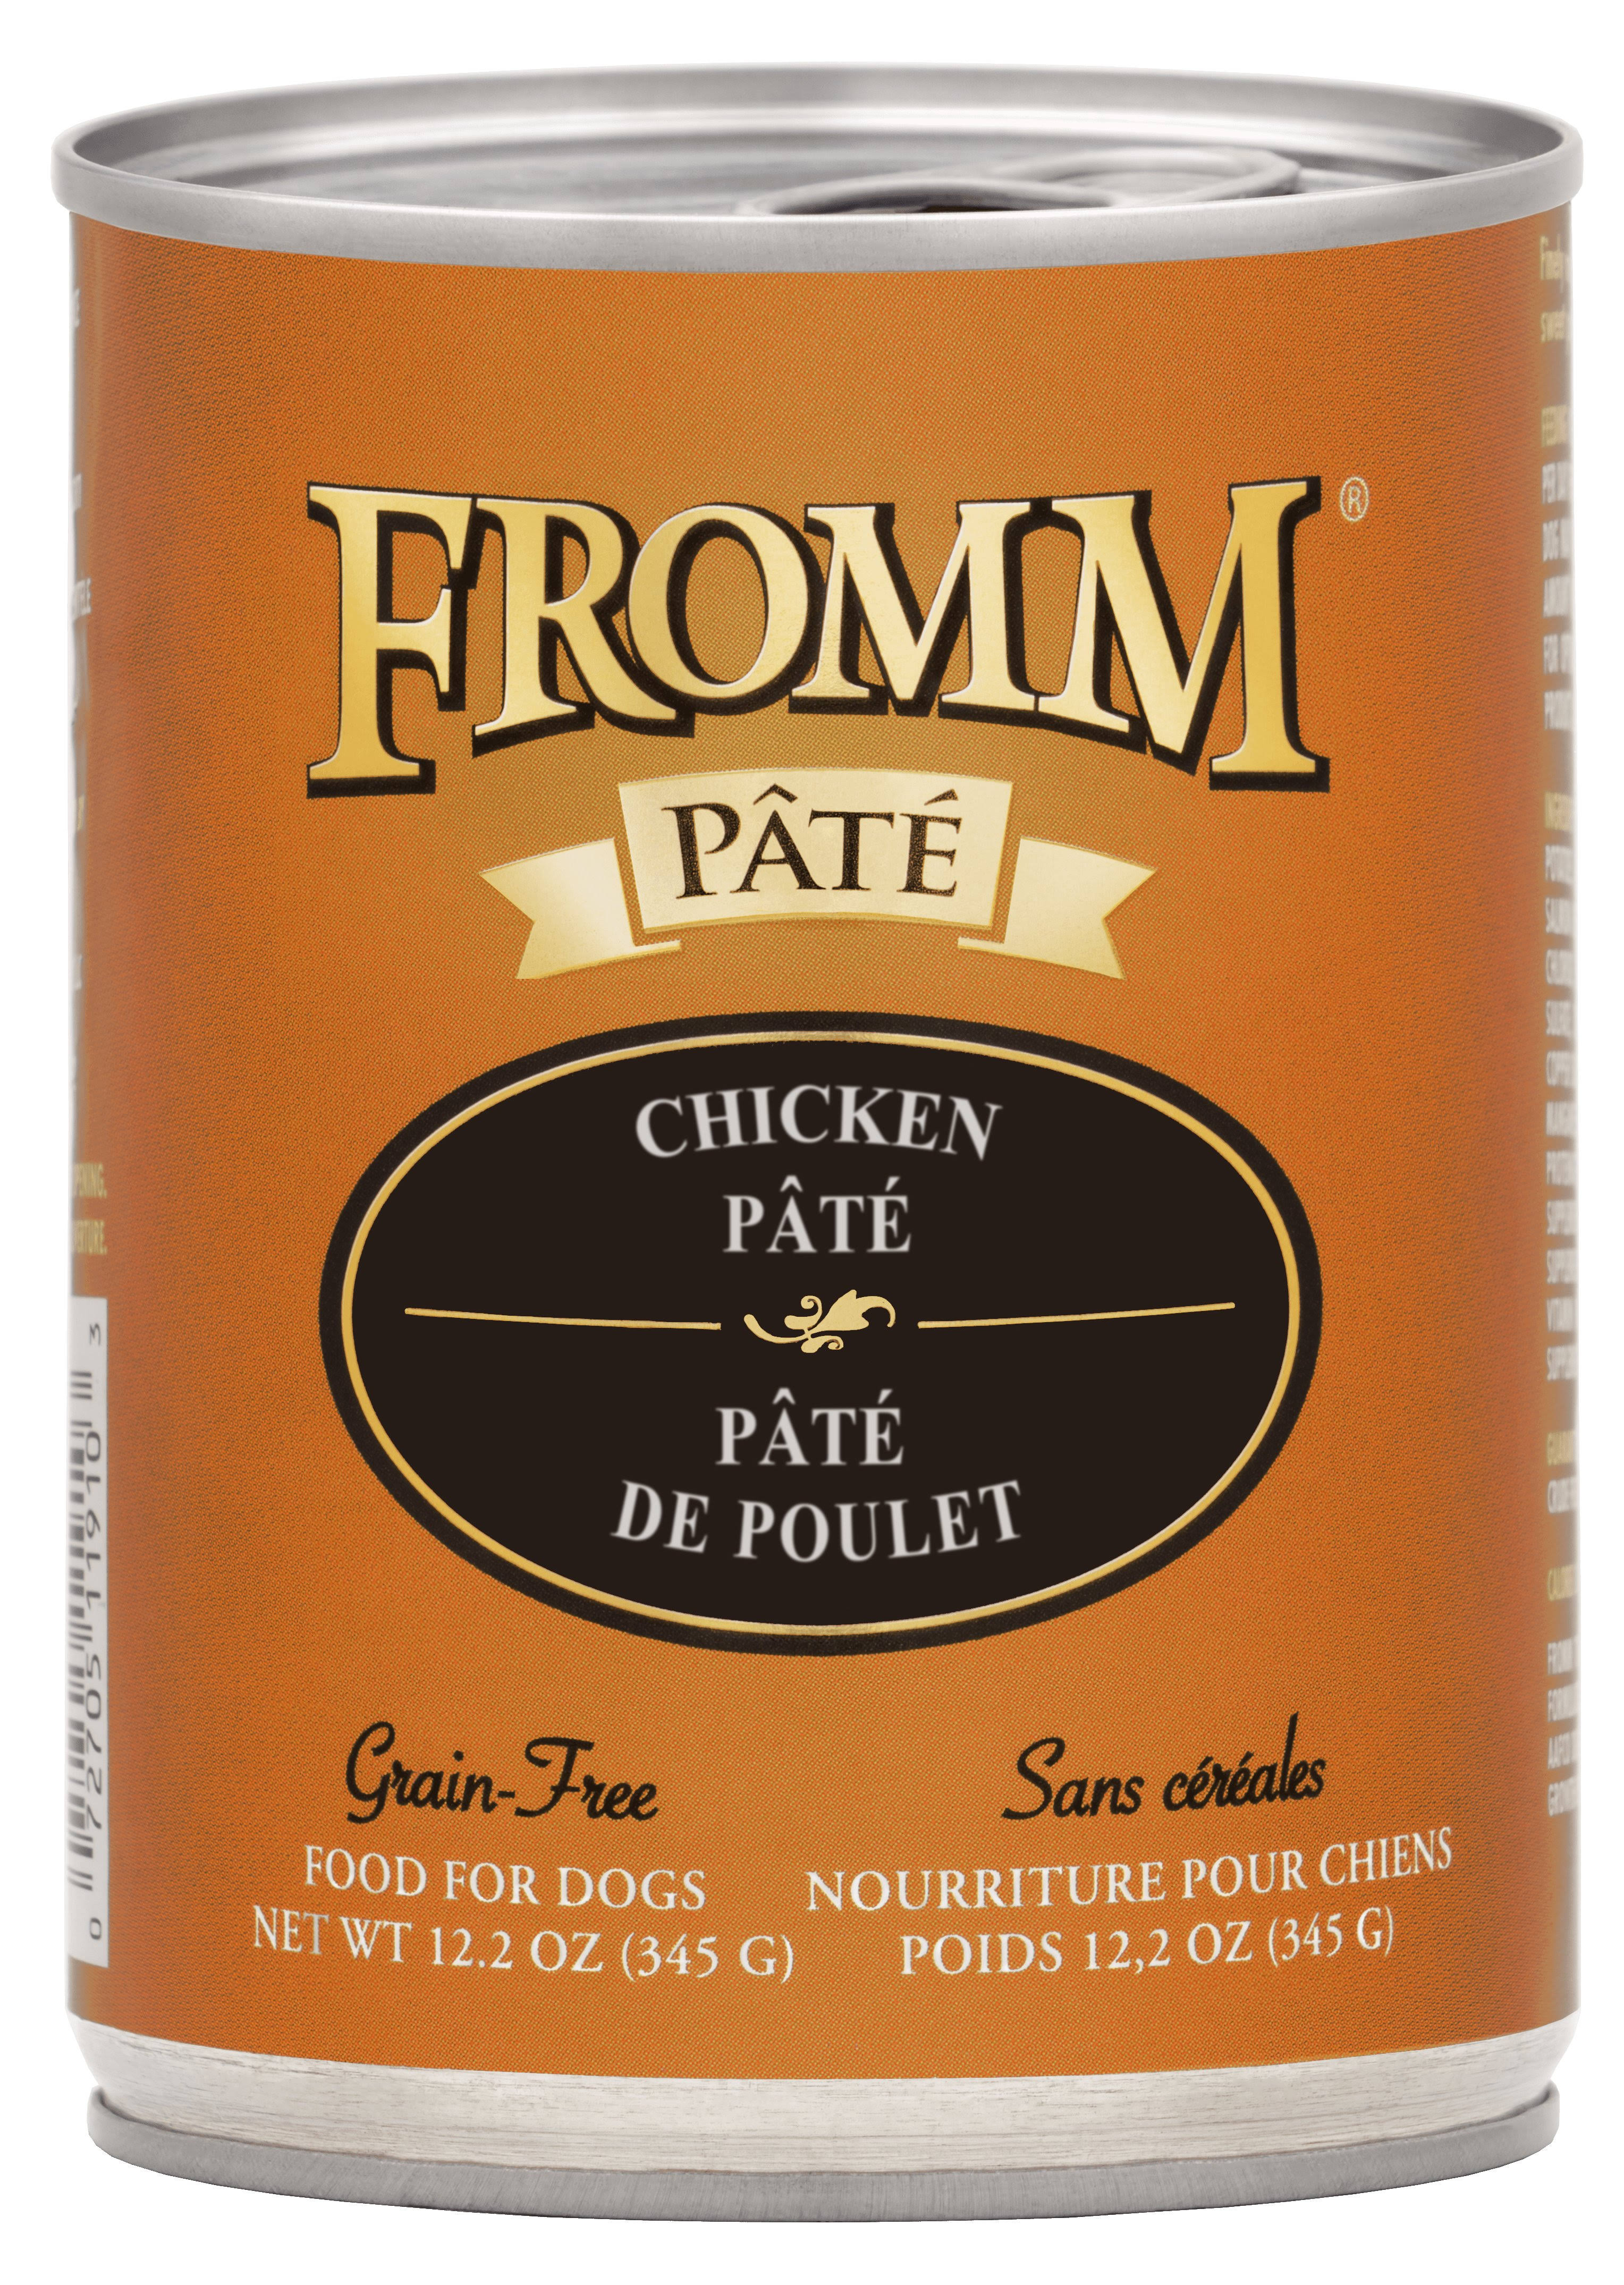 Fromm Canned Dog Food Chicken Pate